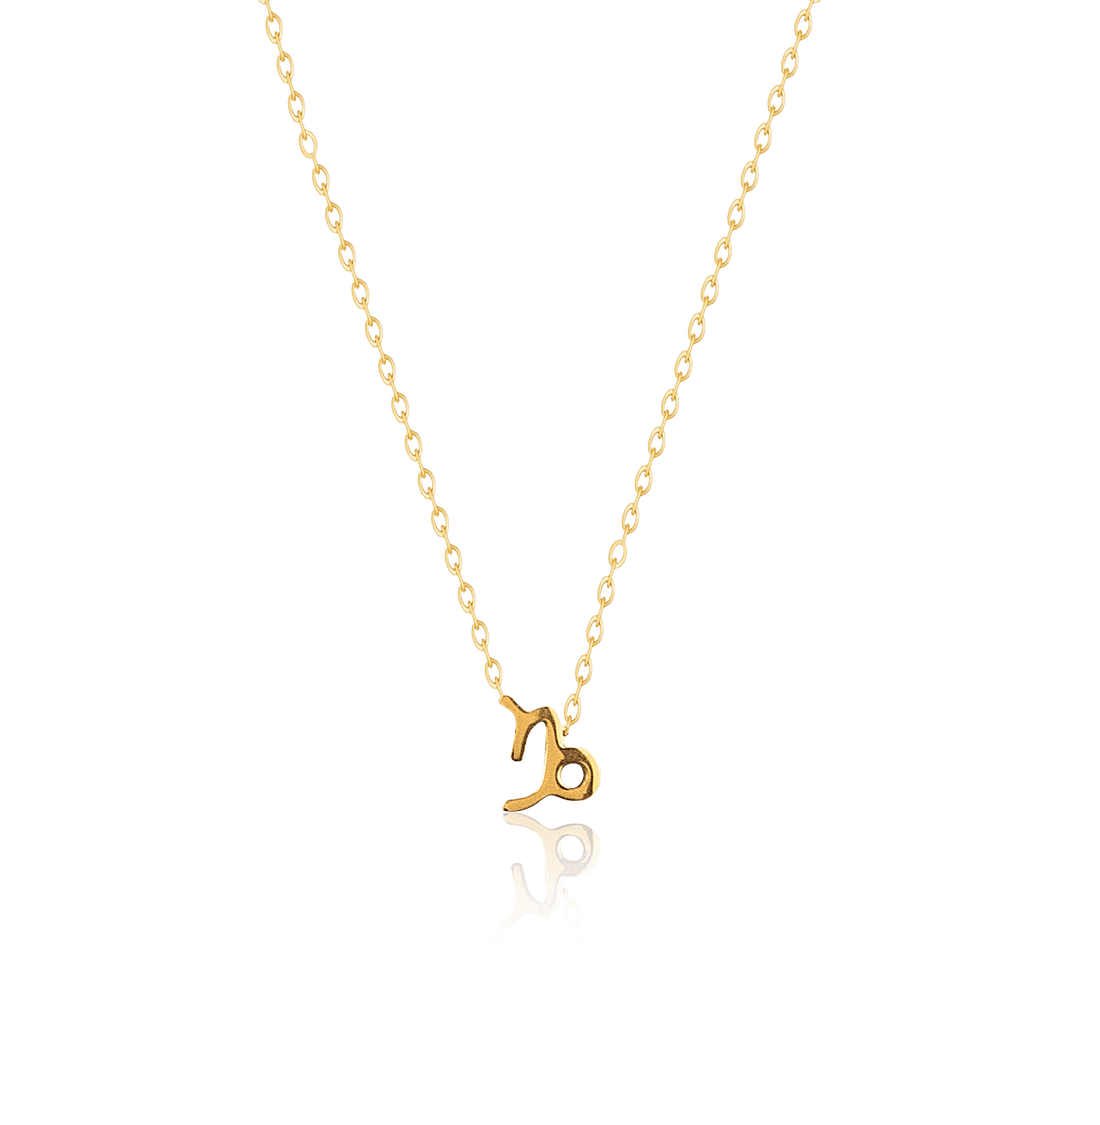 bianco rosso Necklaces Gold Capricorn - Necklace cyprus greece jewelry gift free shipping europe worldwide